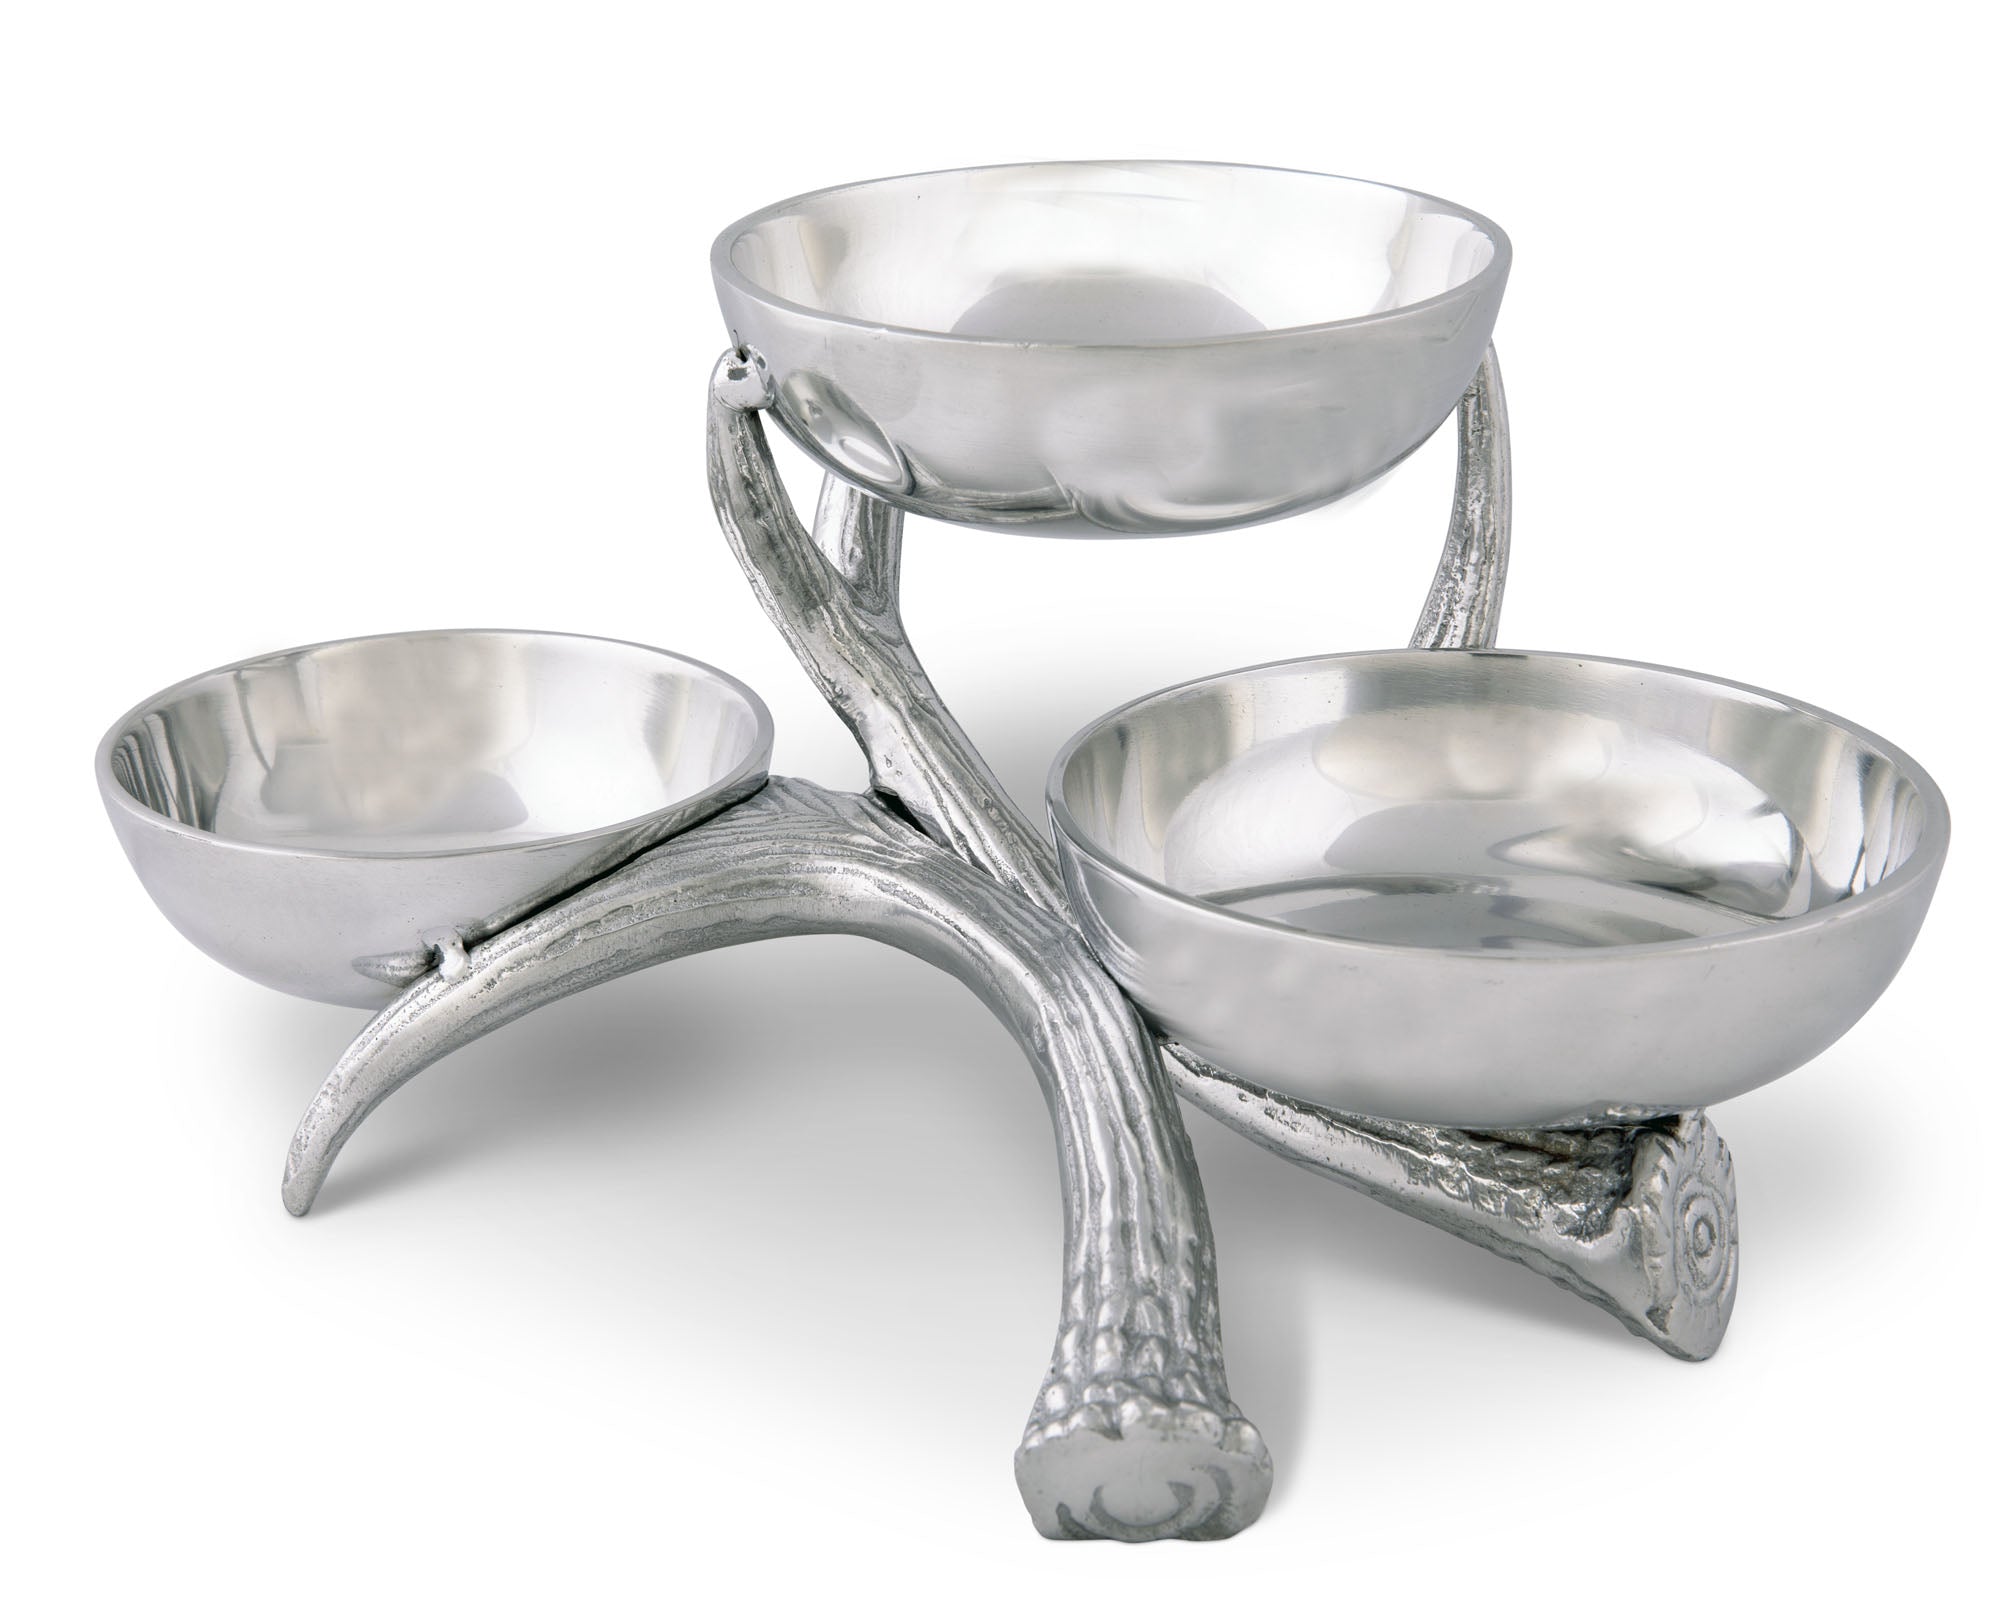 Arthur Court Antler 3-Tiered Bowl Product Image